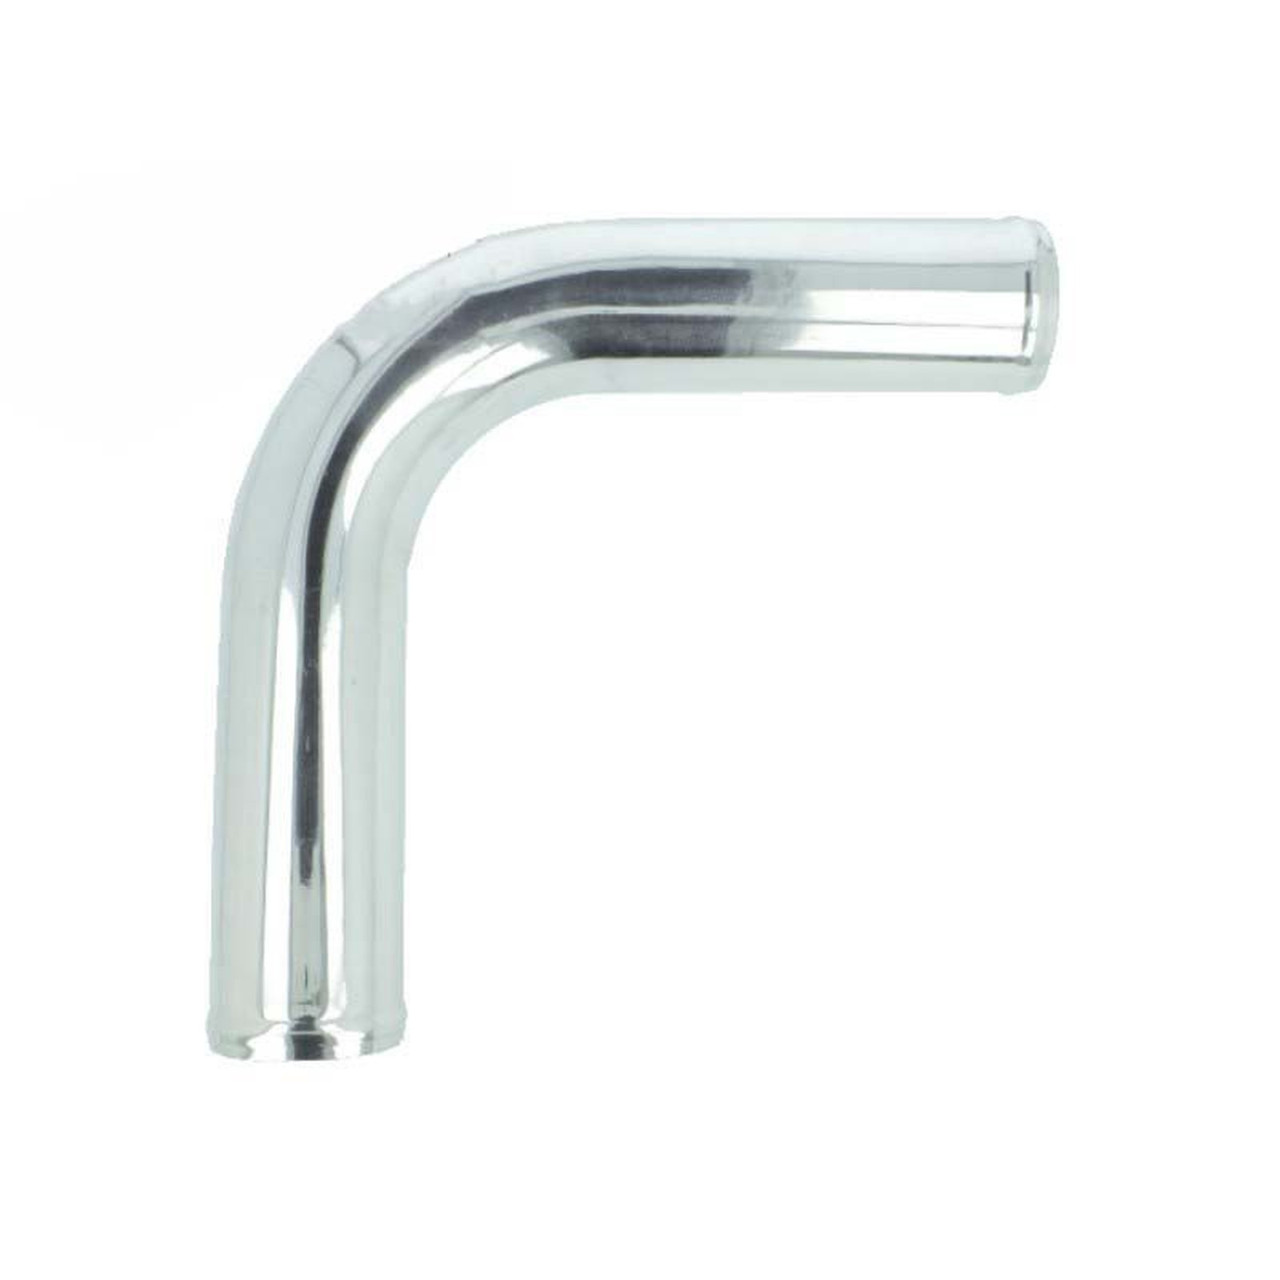 BOOST Products Aluminum Elbow 90 Degrees with 2-3/8" OD, Mandrel Bent, Polished (BOP-3102029060)